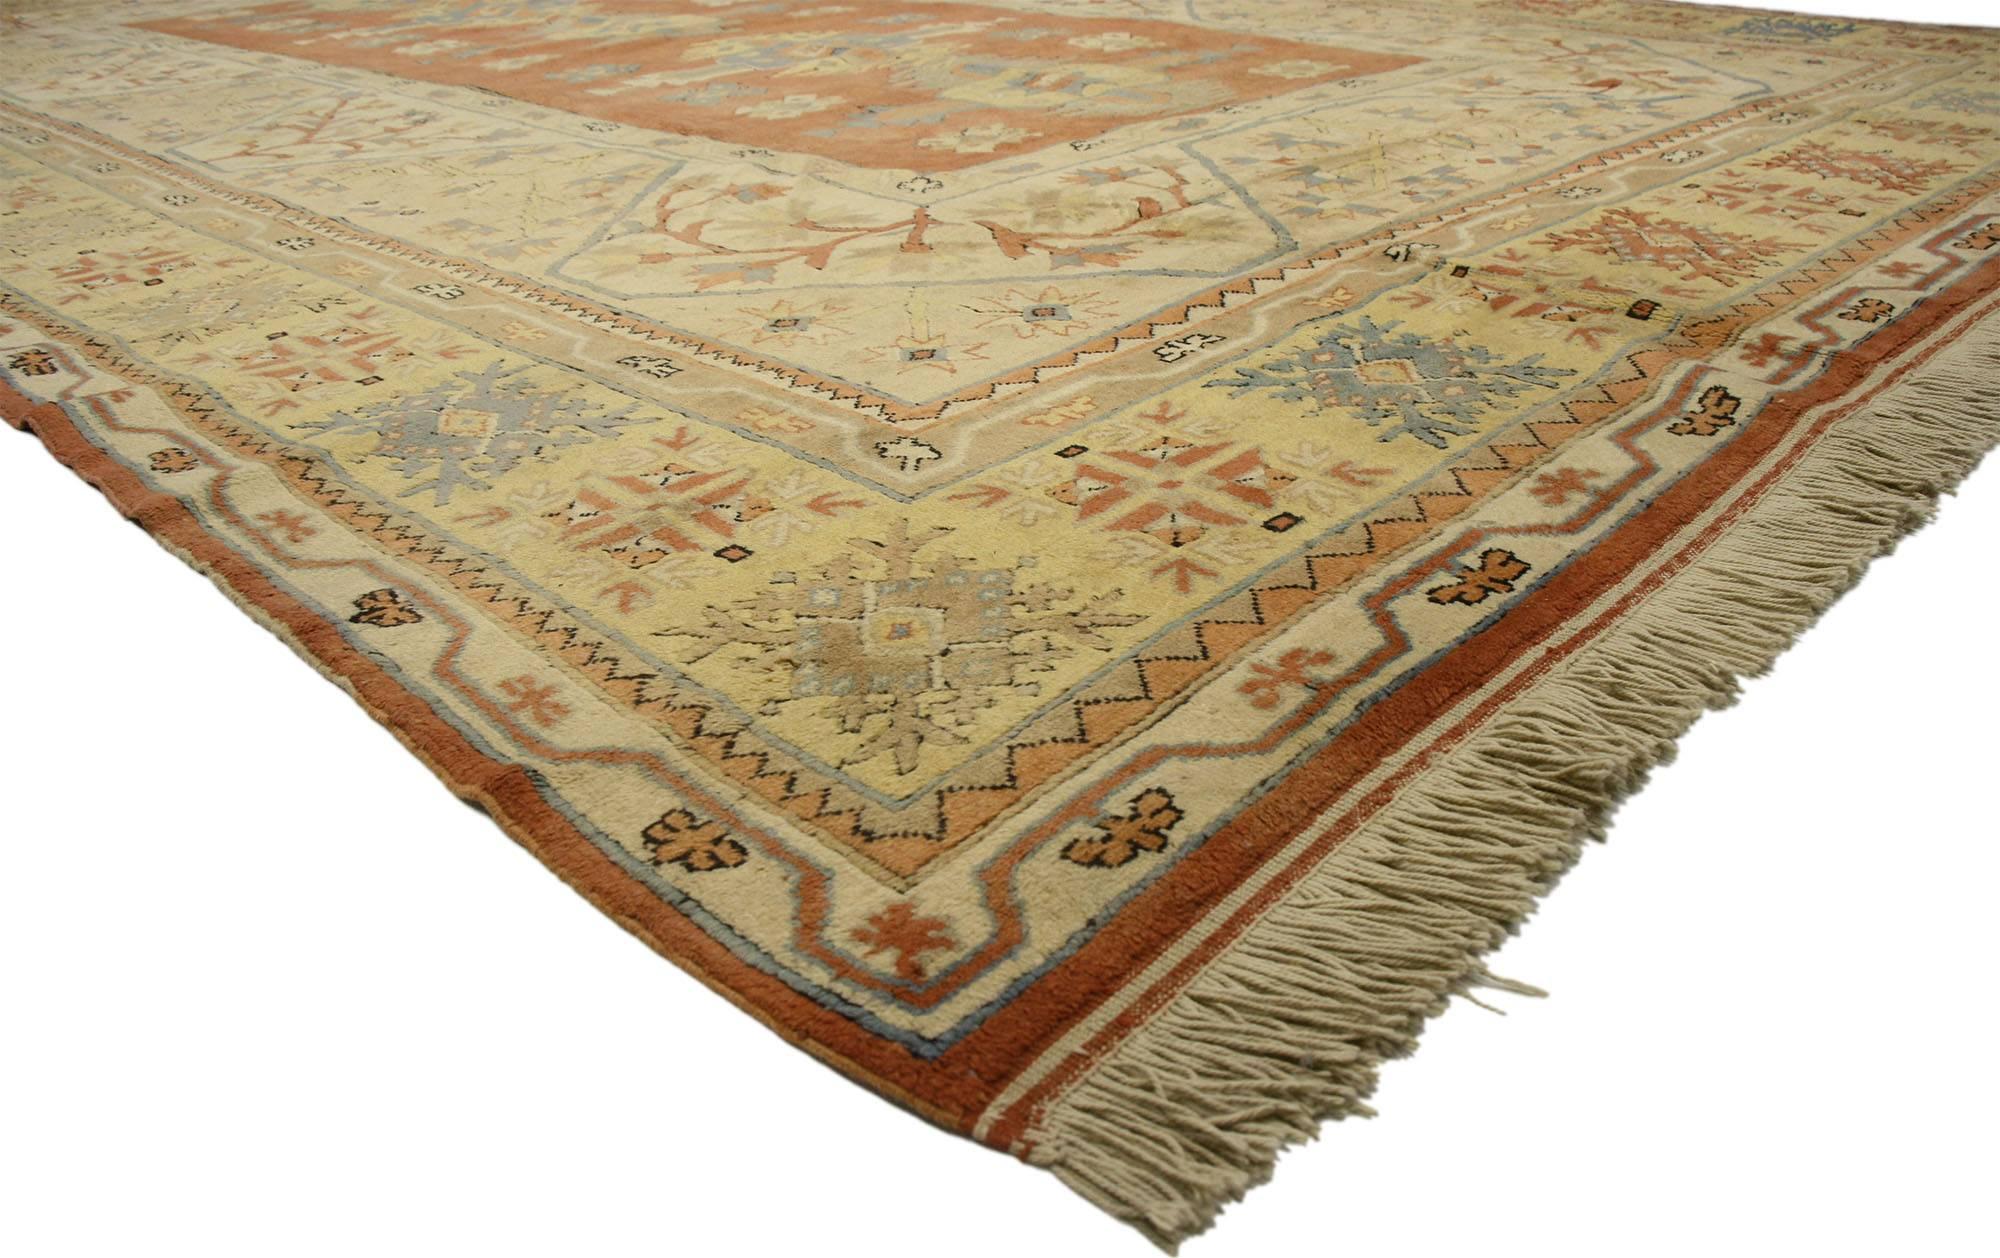 77123, vintage Turkish Oushak Palace size rug with Biophilia Artisan and Mid-Century Modern style. With architectural biophilia elements combined naturalistic forms, this hand knotted wool vintage Turkish Oushak rug embodies a rustic Artisan